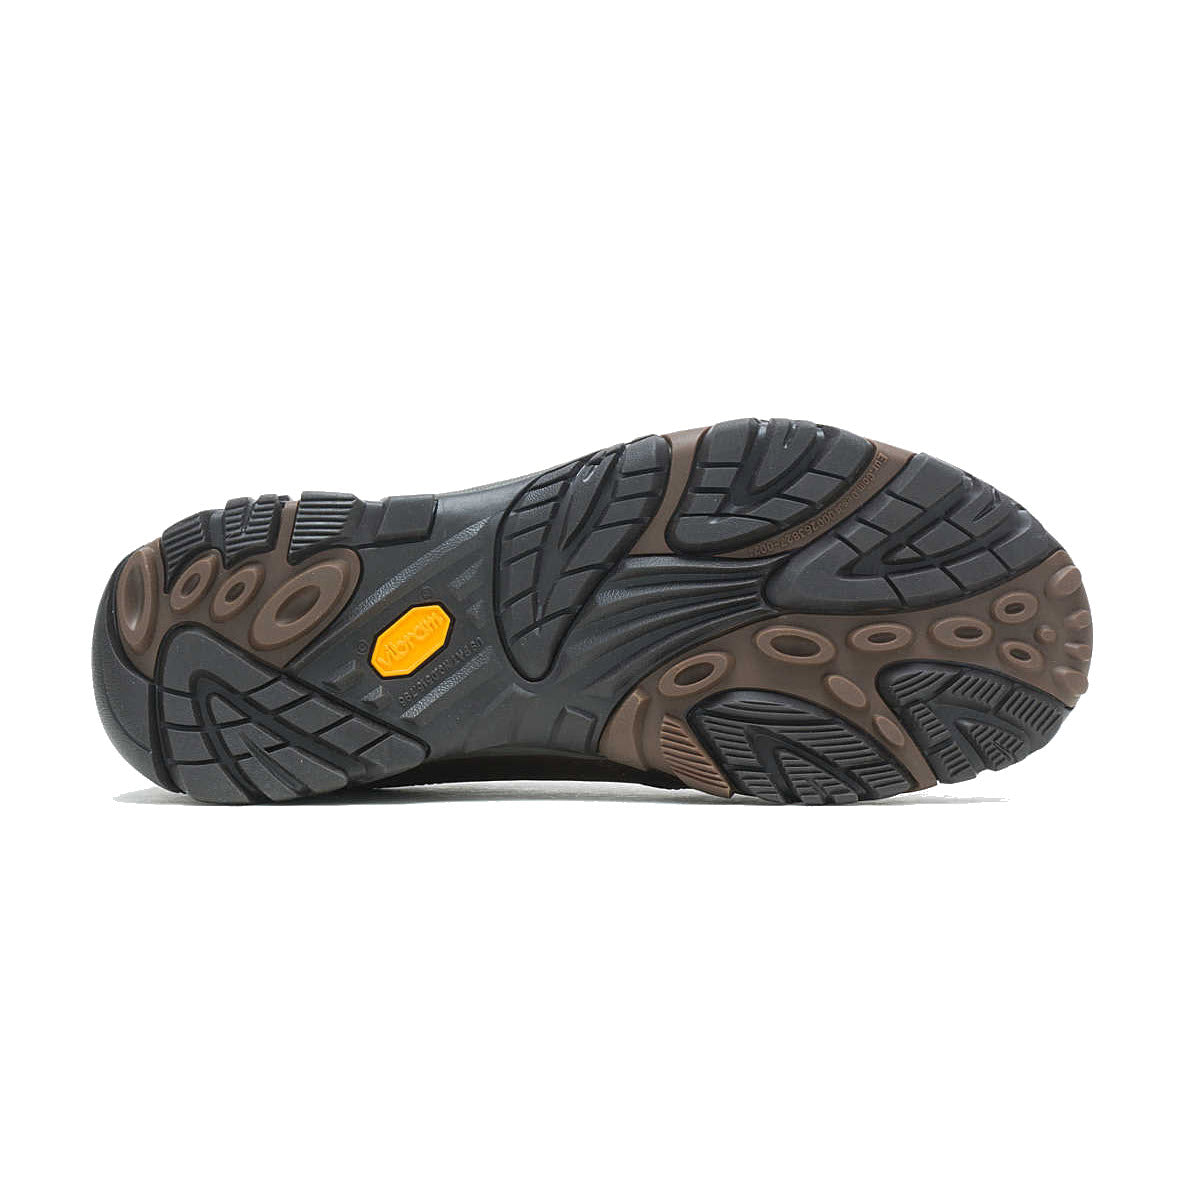 Bottom view of a Merrell shoe featuring a detailed tread pattern with black and brown rubber sole designed for all-day comfort and a yellow Merrell logo.